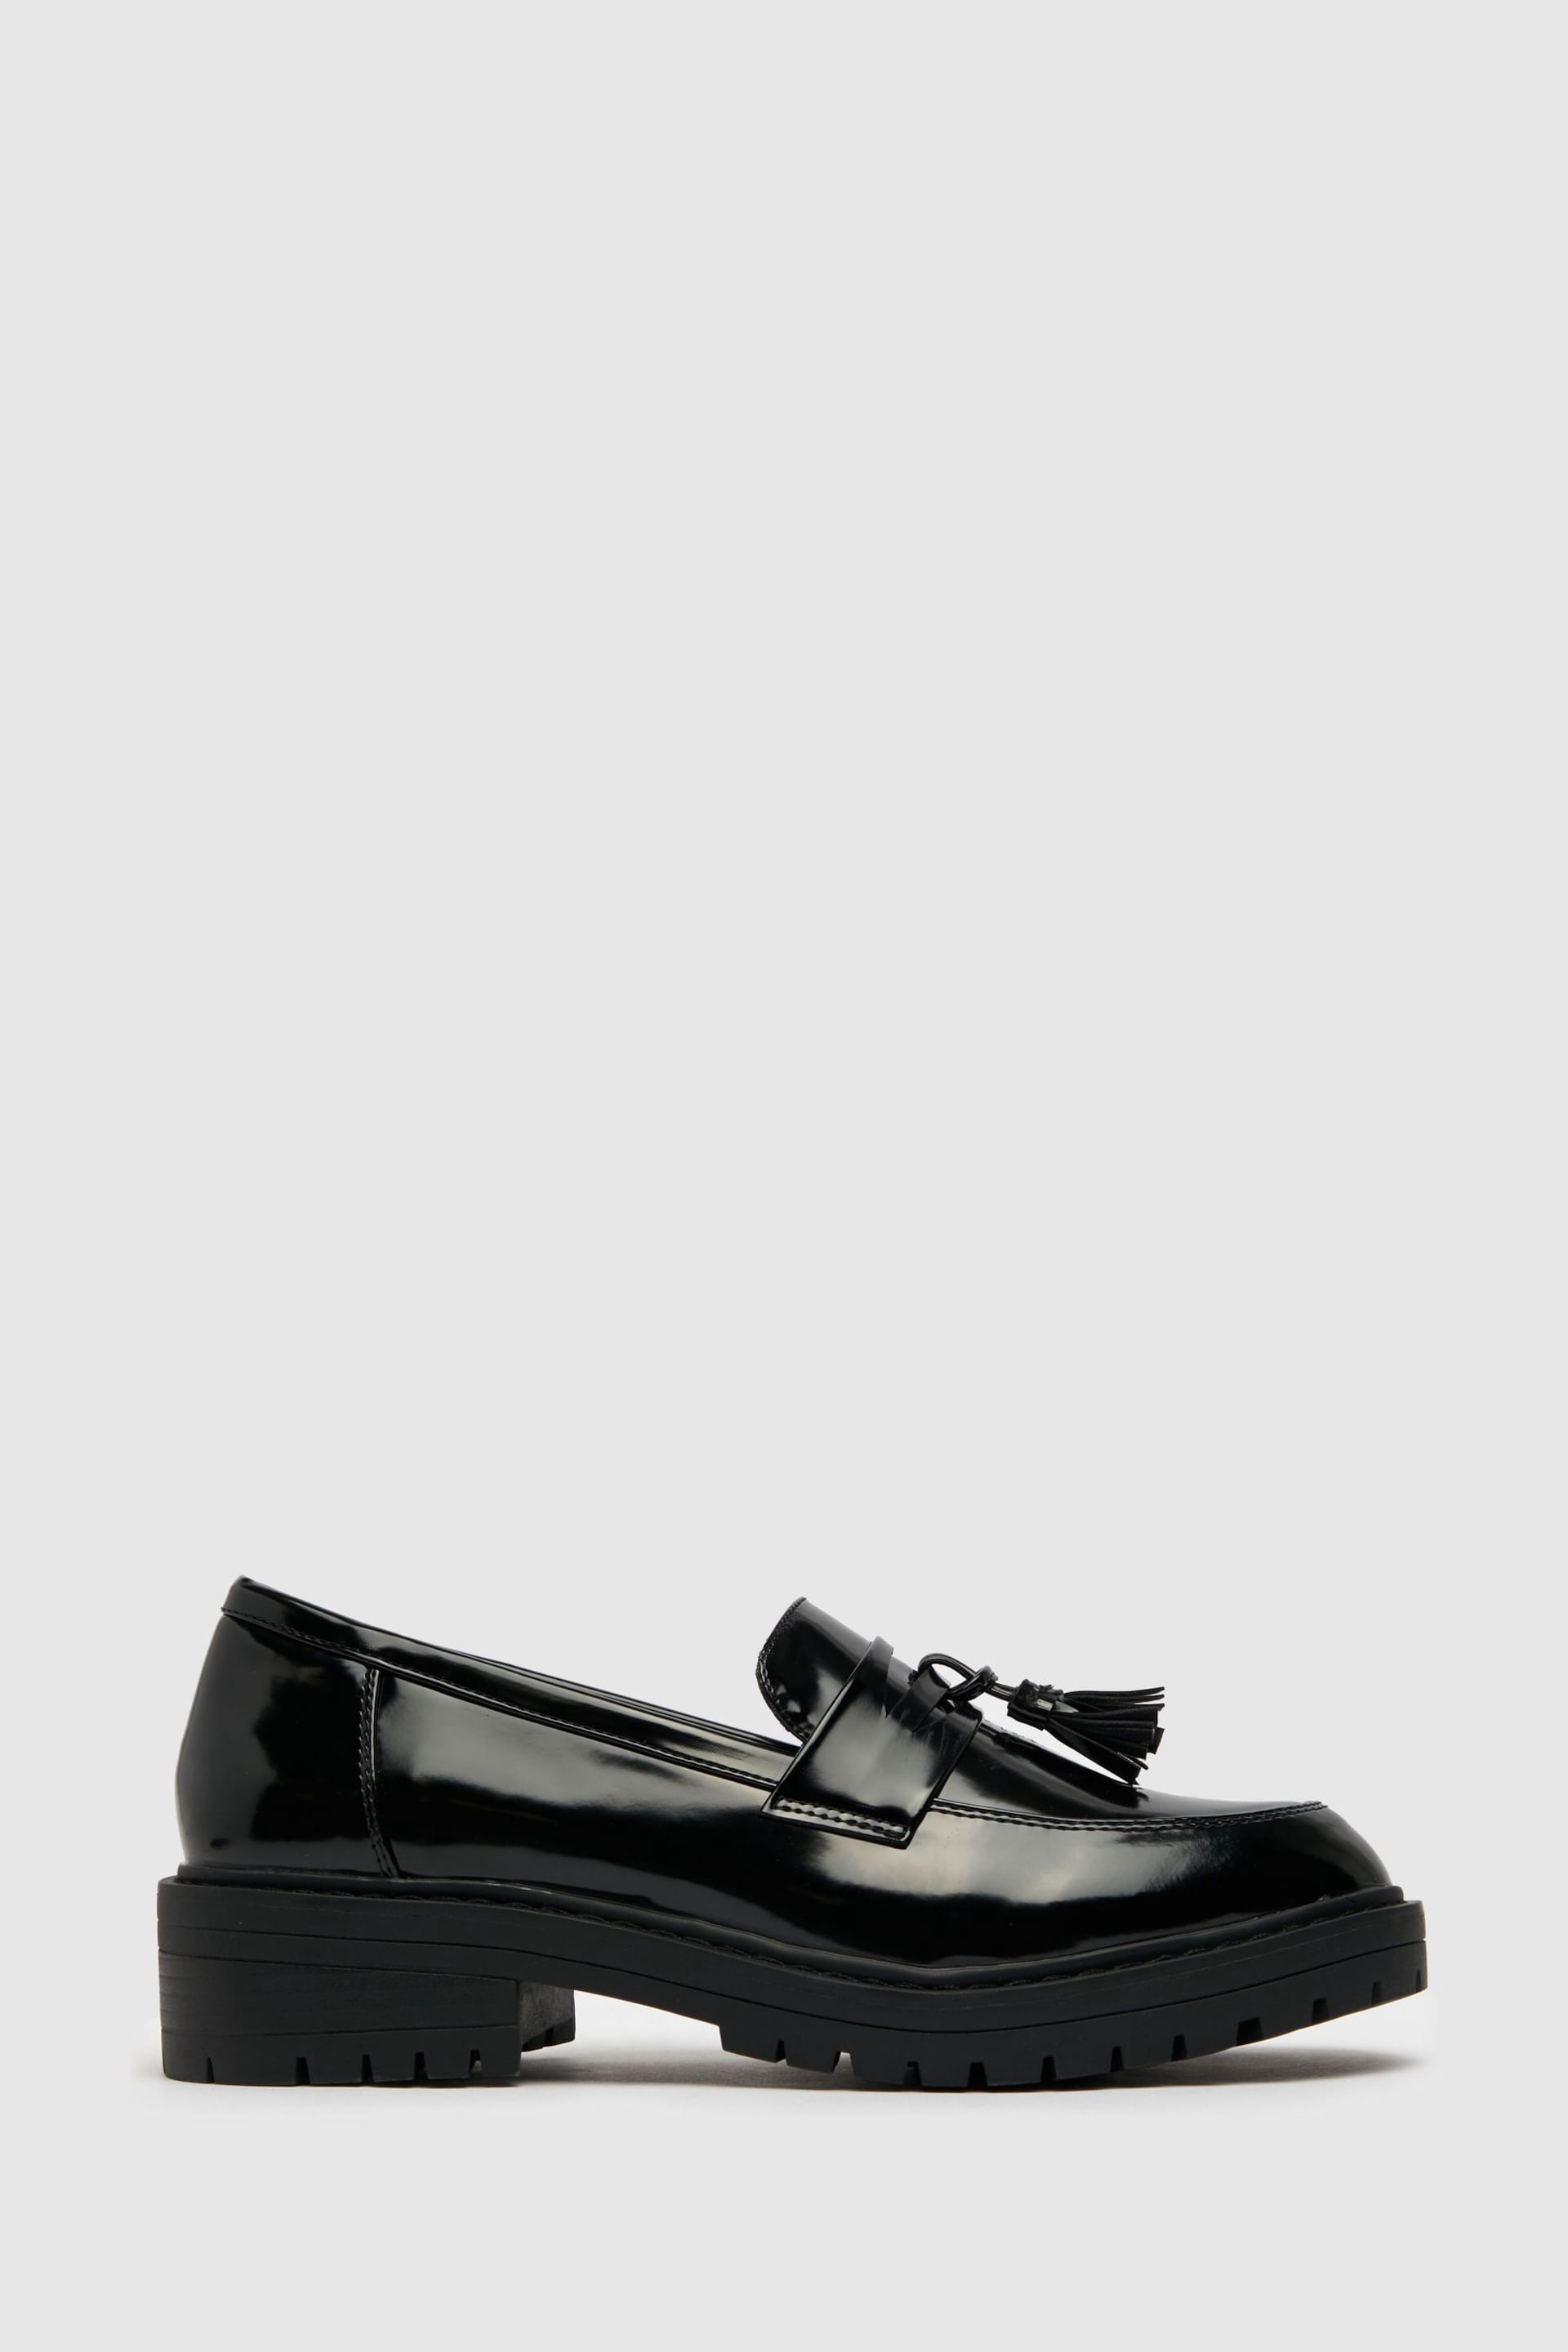 Schuh Lexi Chunky Patent Loafers - Image 1 of 4